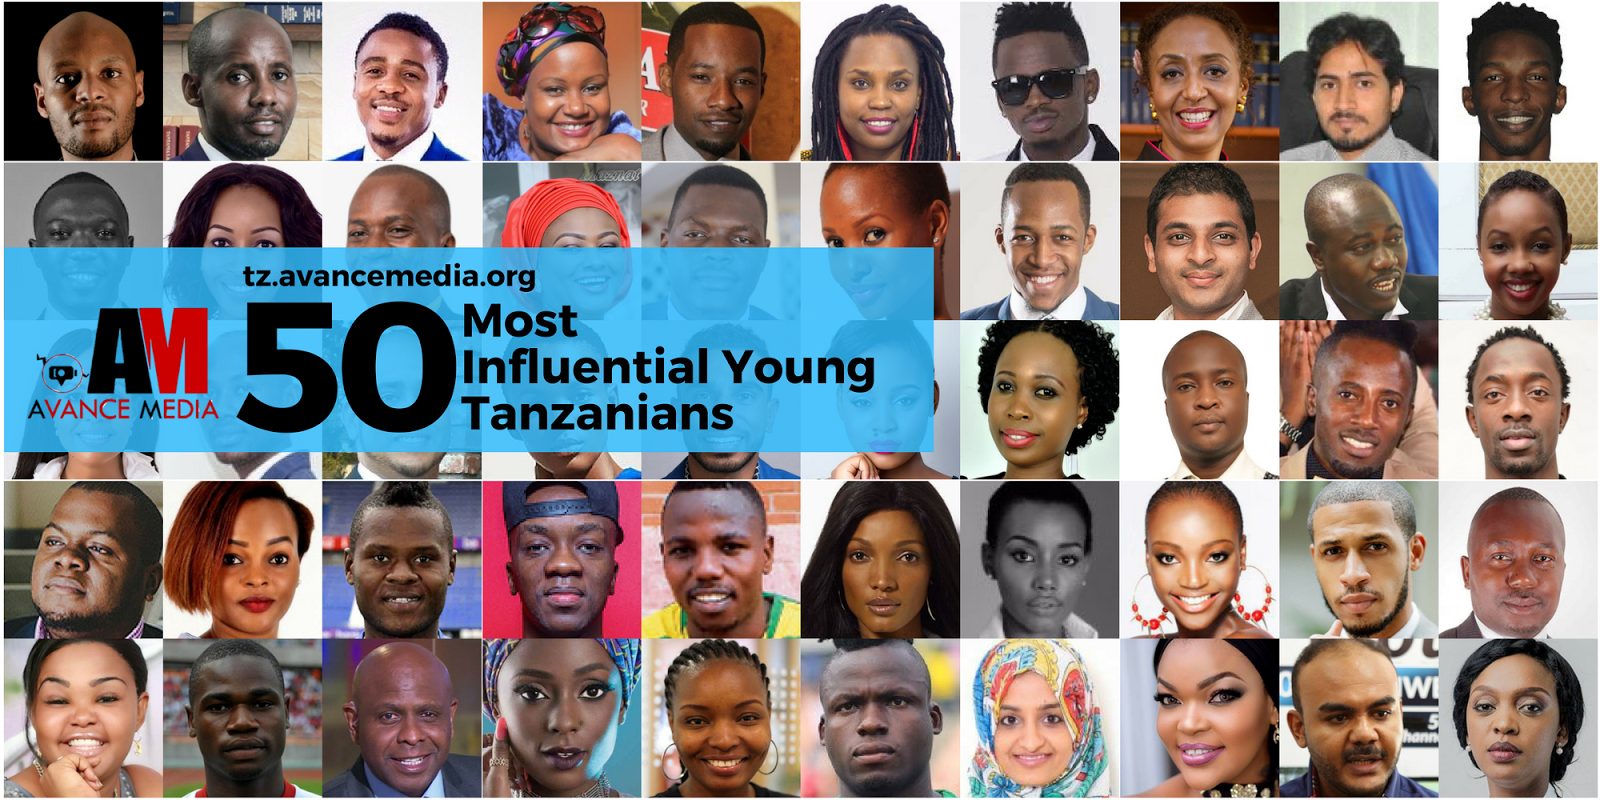 THE YCEO: Nominees for the 50 Most Influential Young Tanzanians 2017 Announced